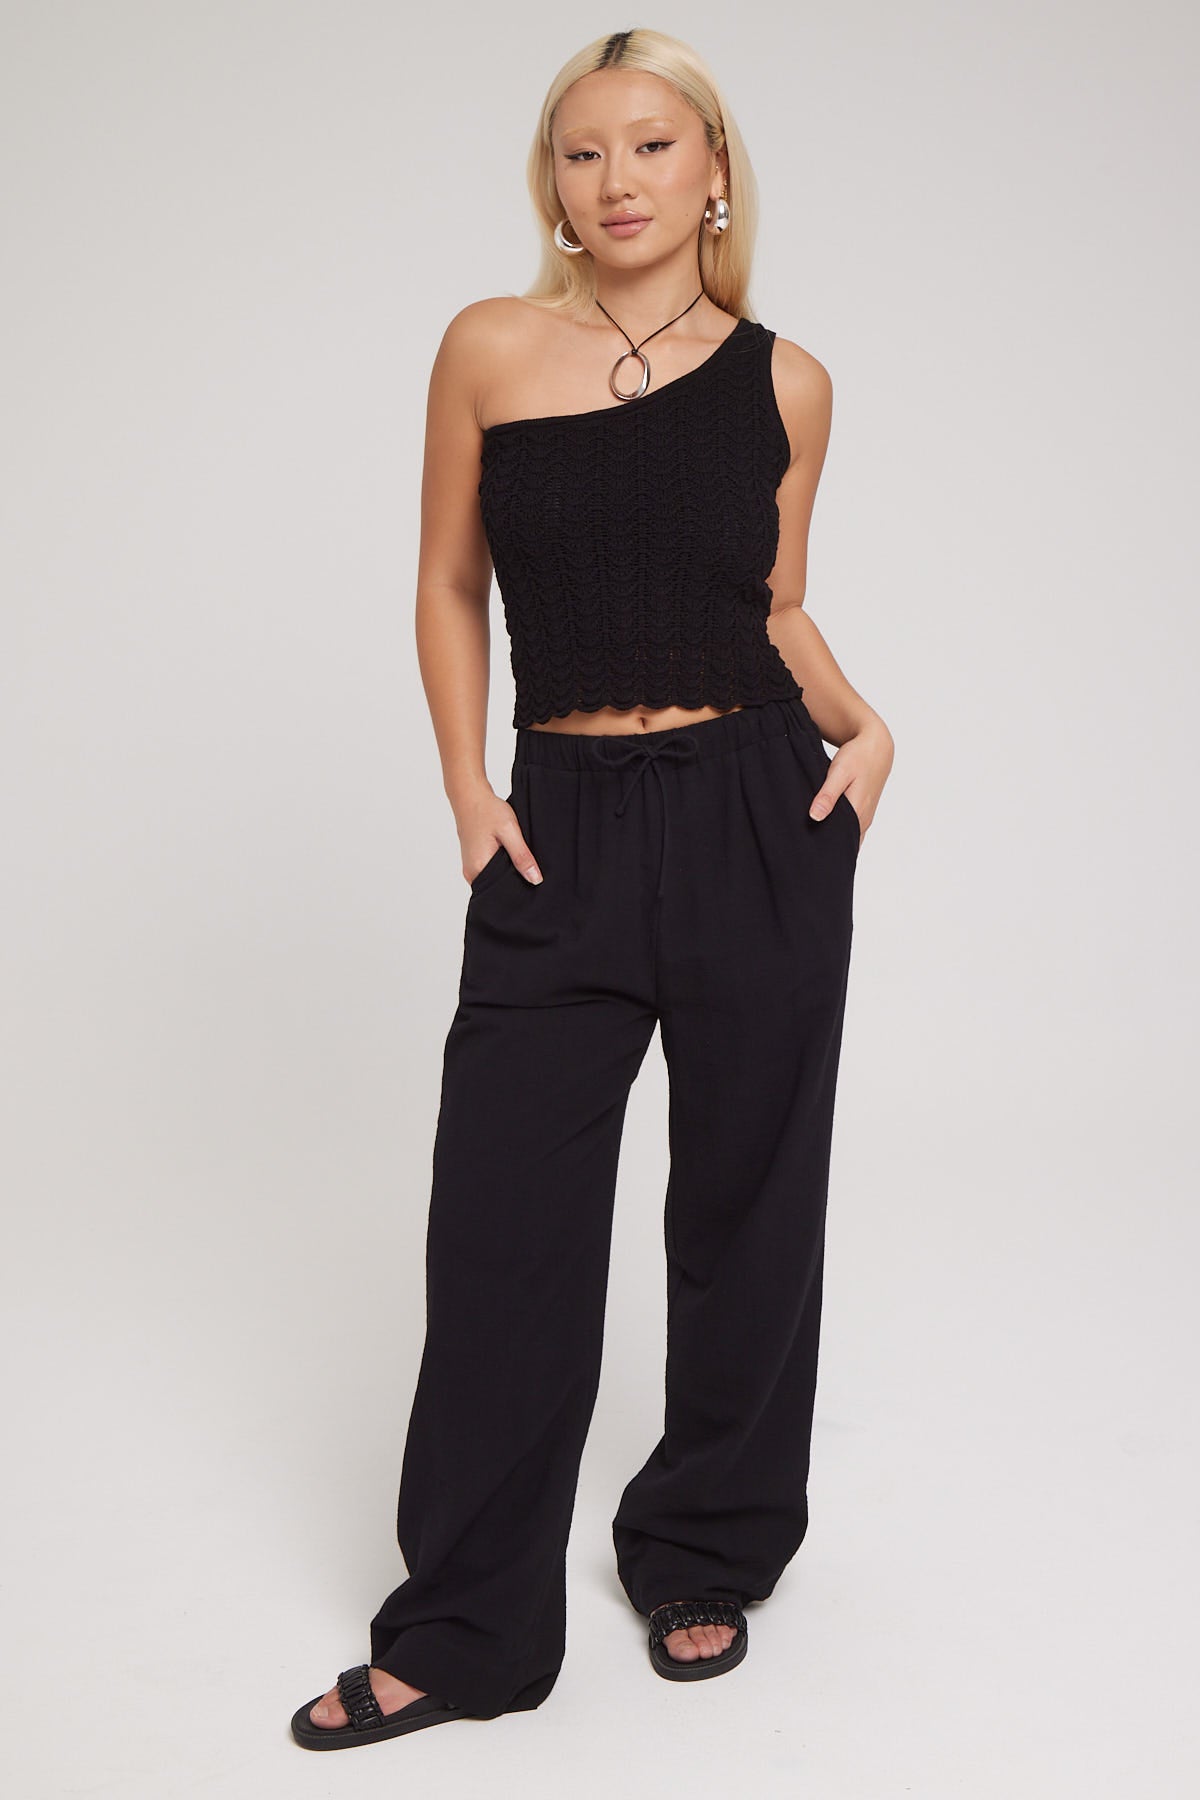 Perfect Stranger Sunset Relaxed Pant Black – Universal Store